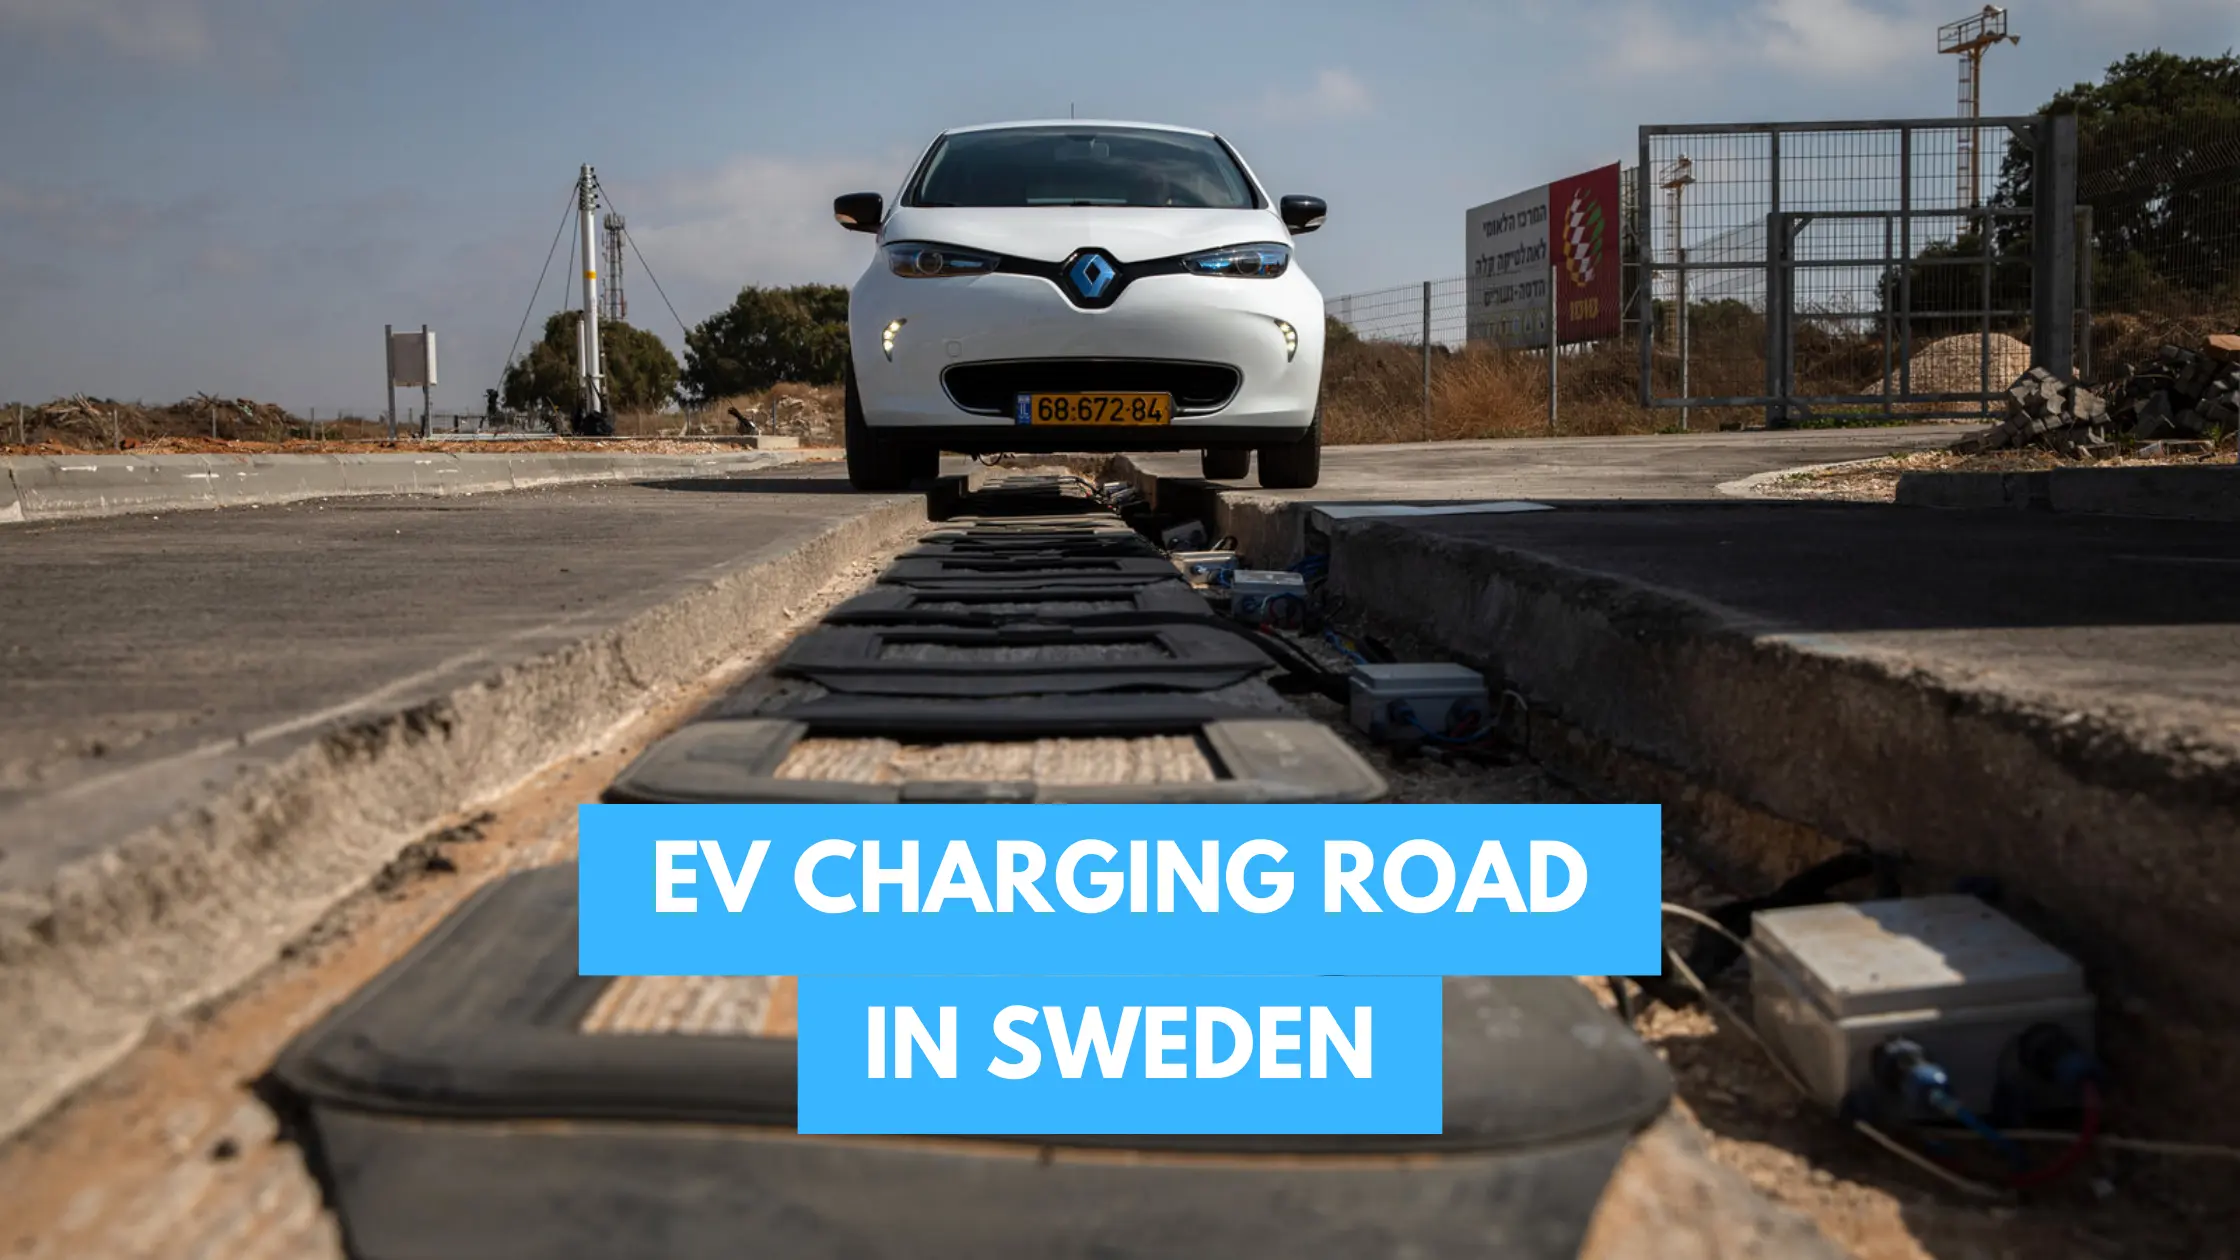 You are currently viewing Roads in Sweden Charges Electric Fleet on the Move.